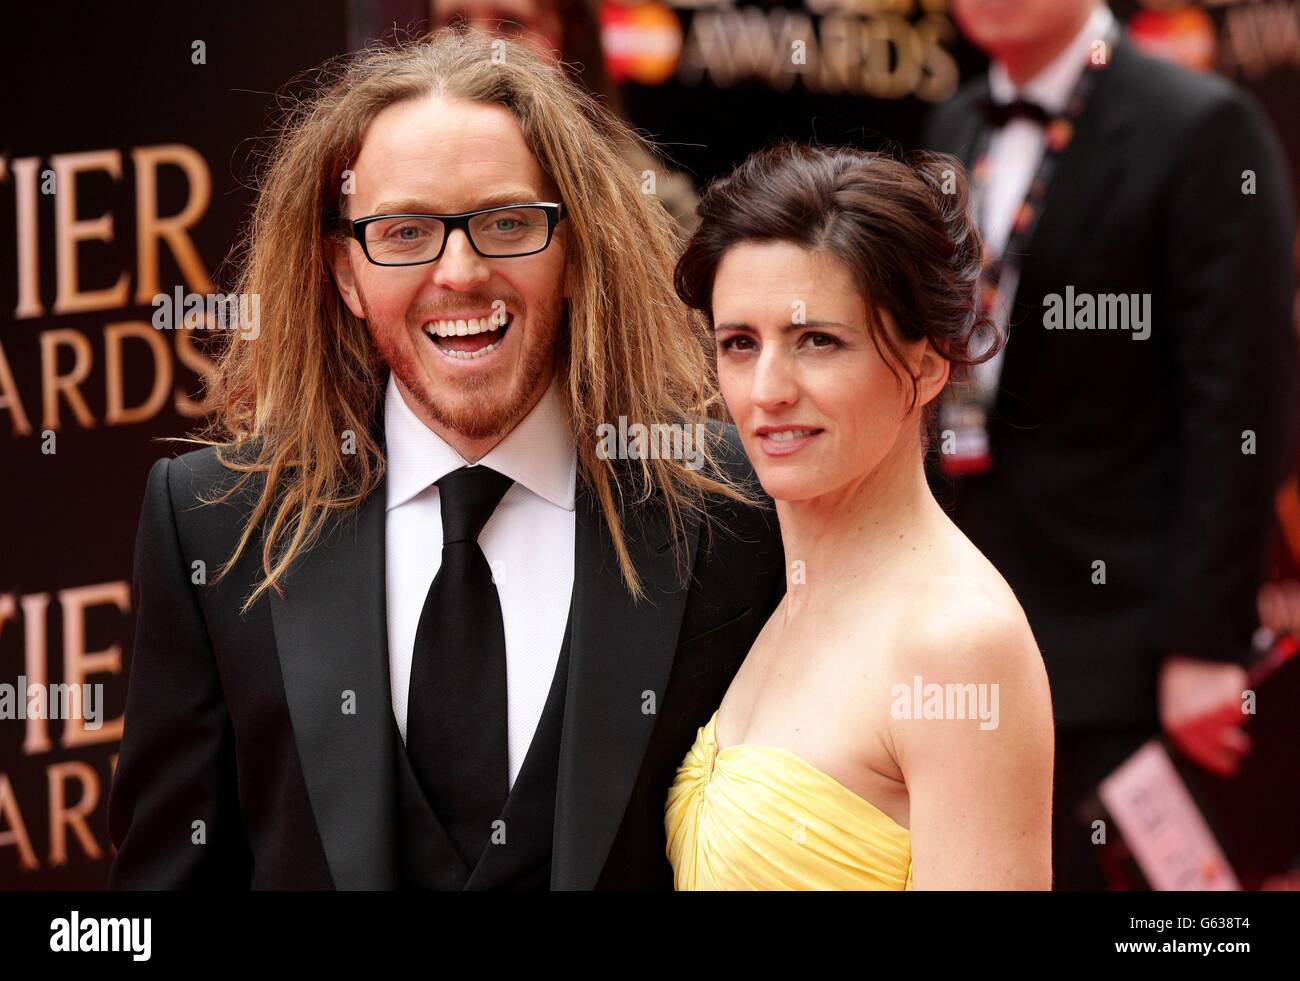 Tim and minchin hi-res stock photography and - Alamy